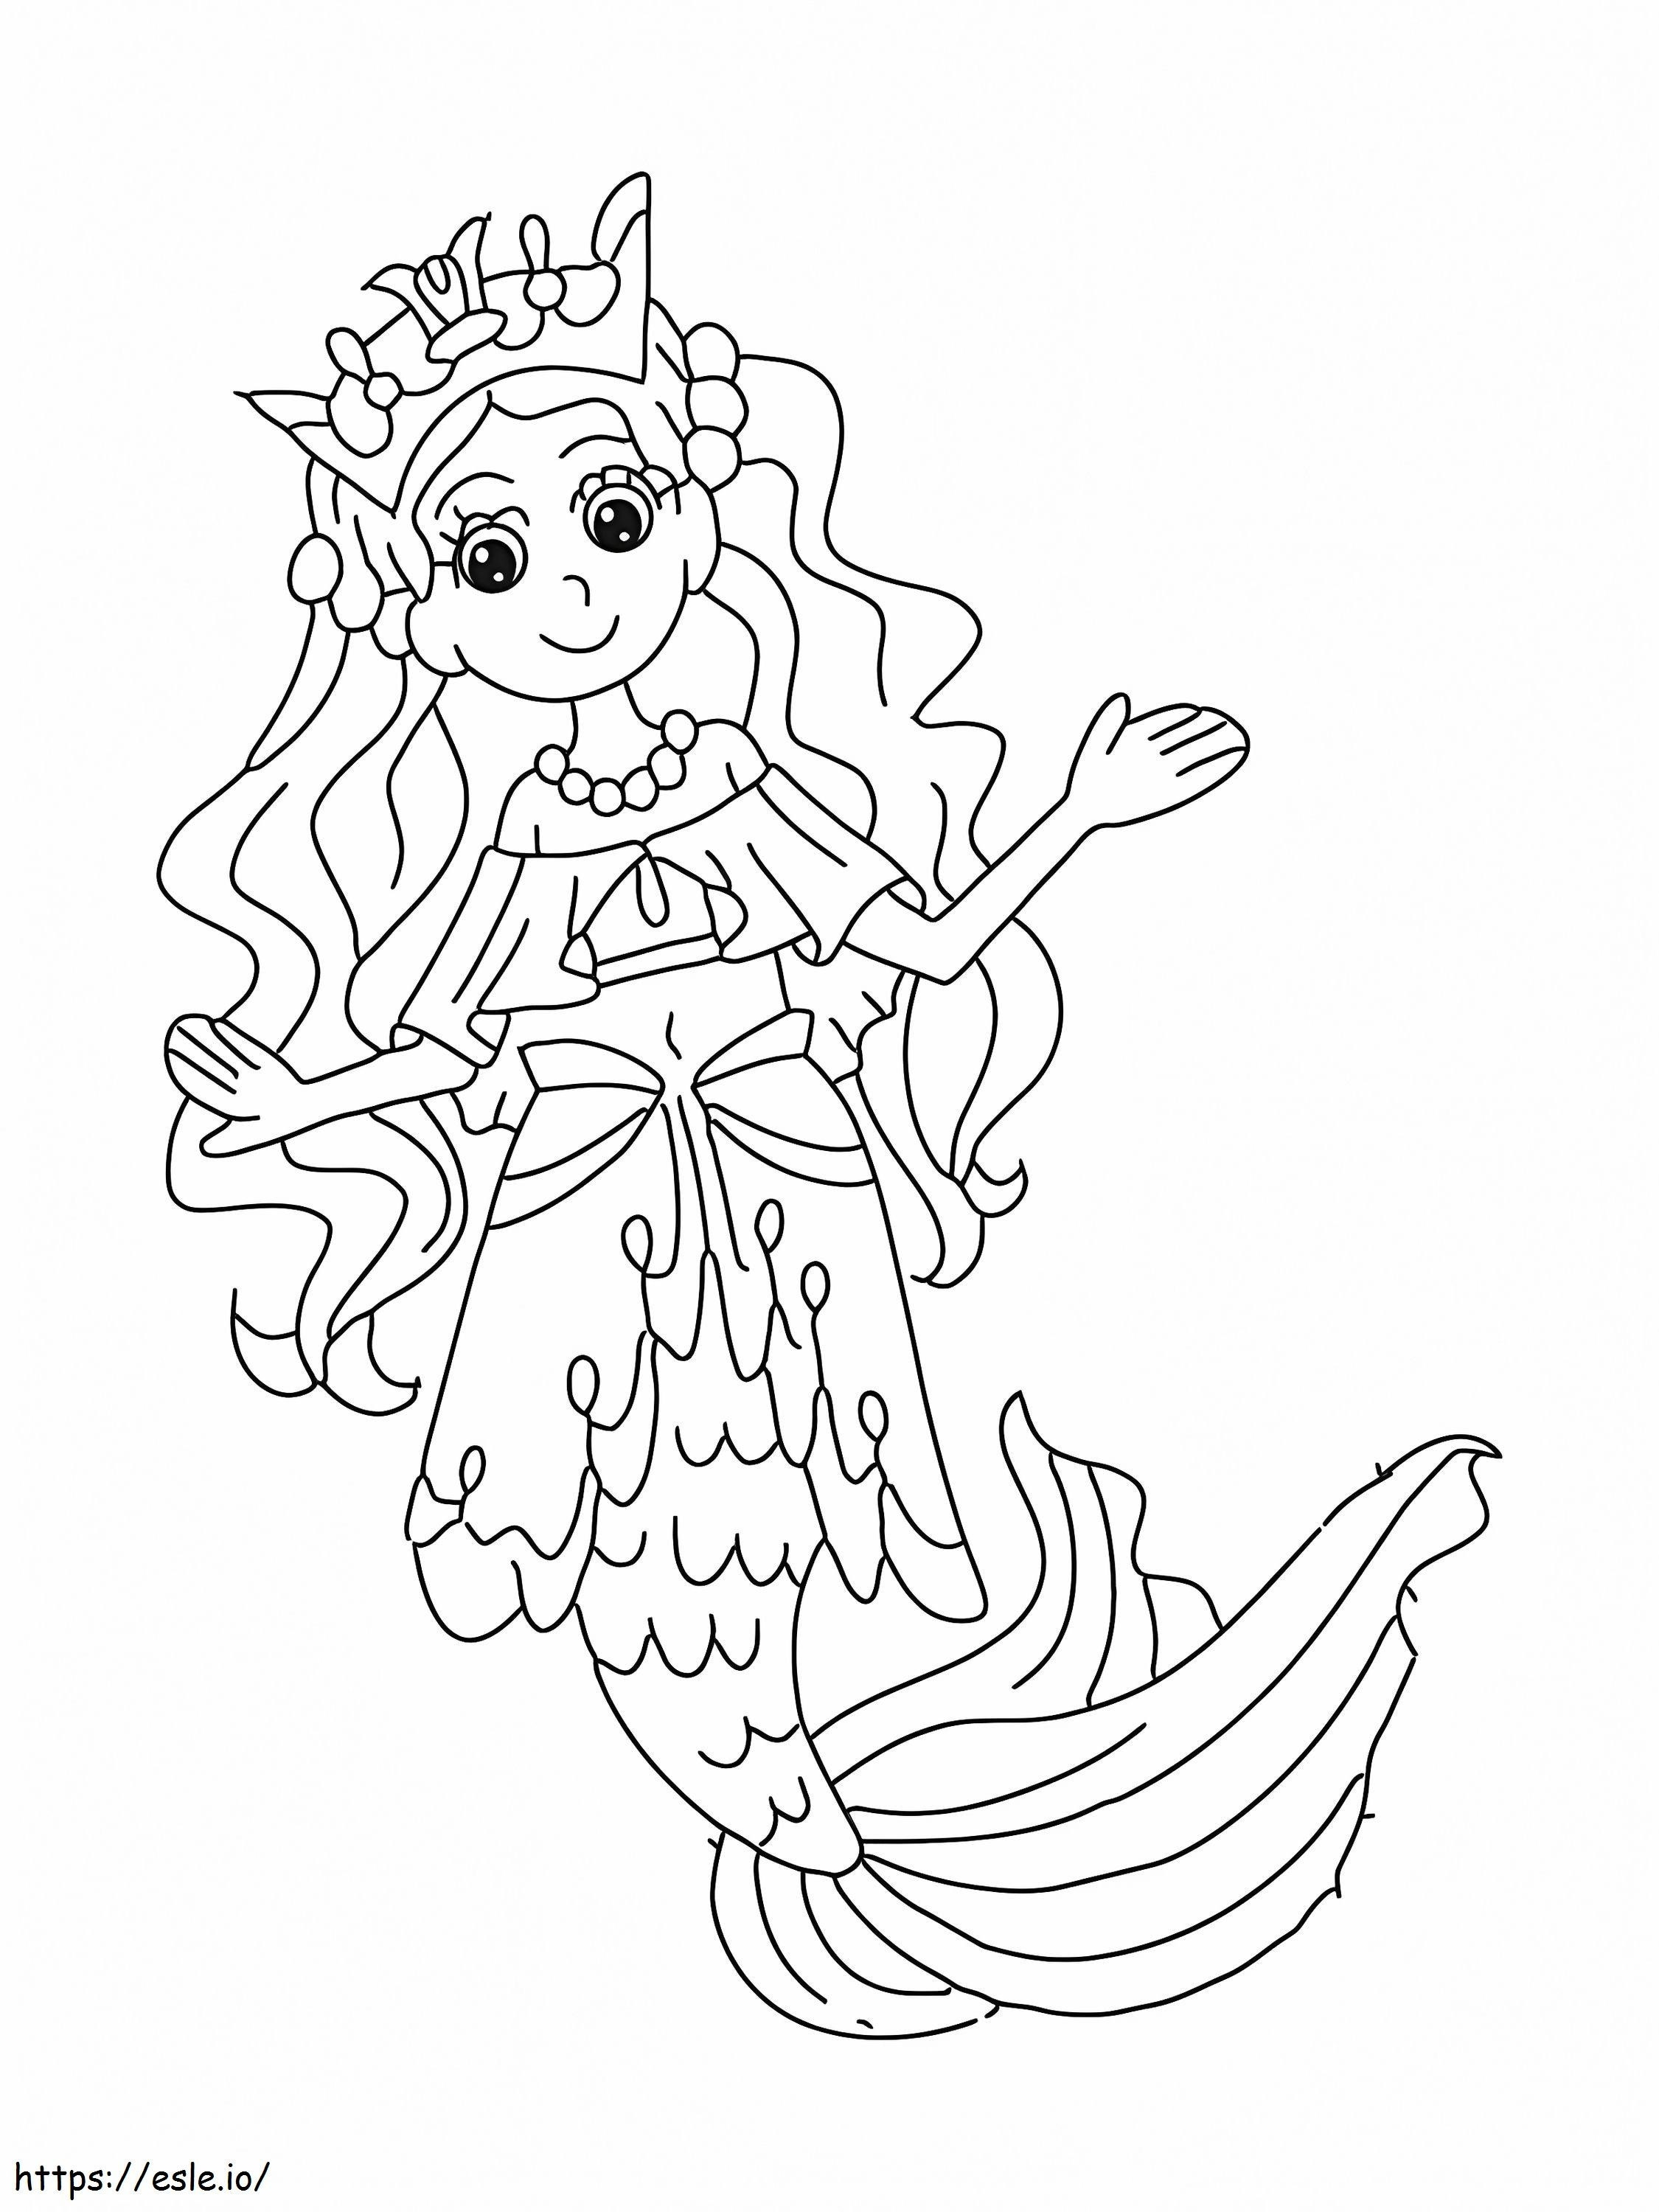 Beauty Queen Mermaid coloring page